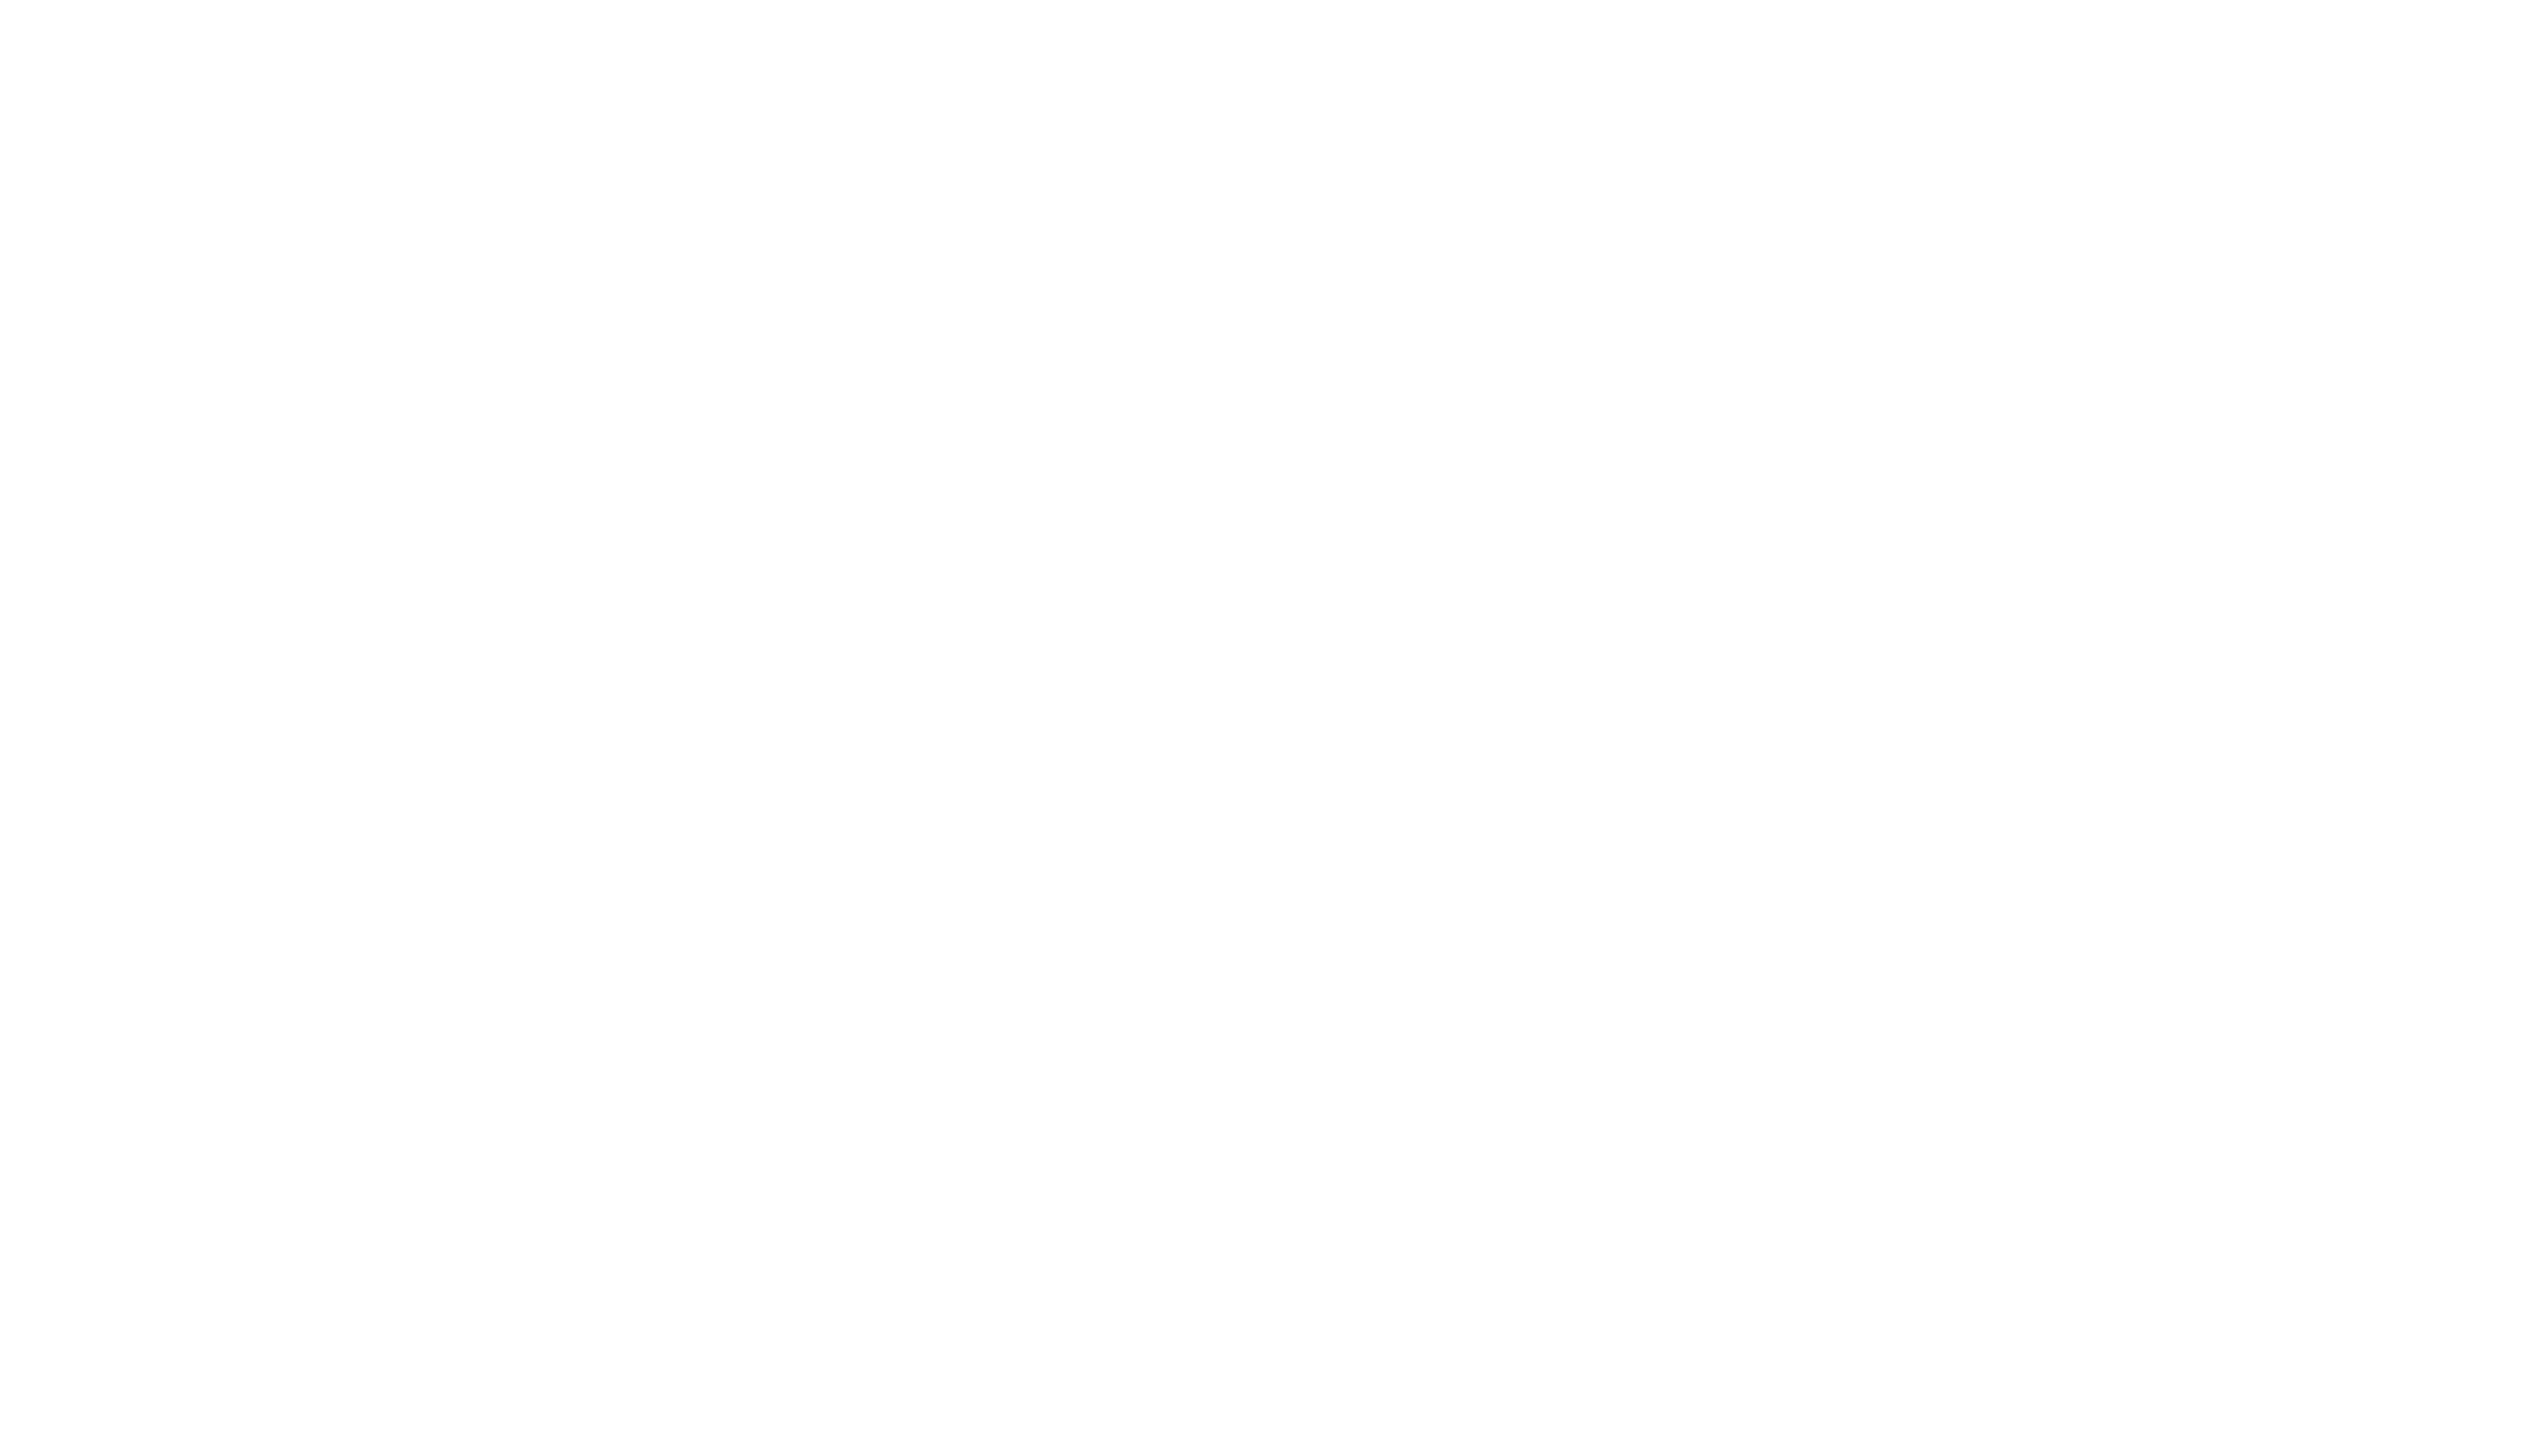 now available for streaming